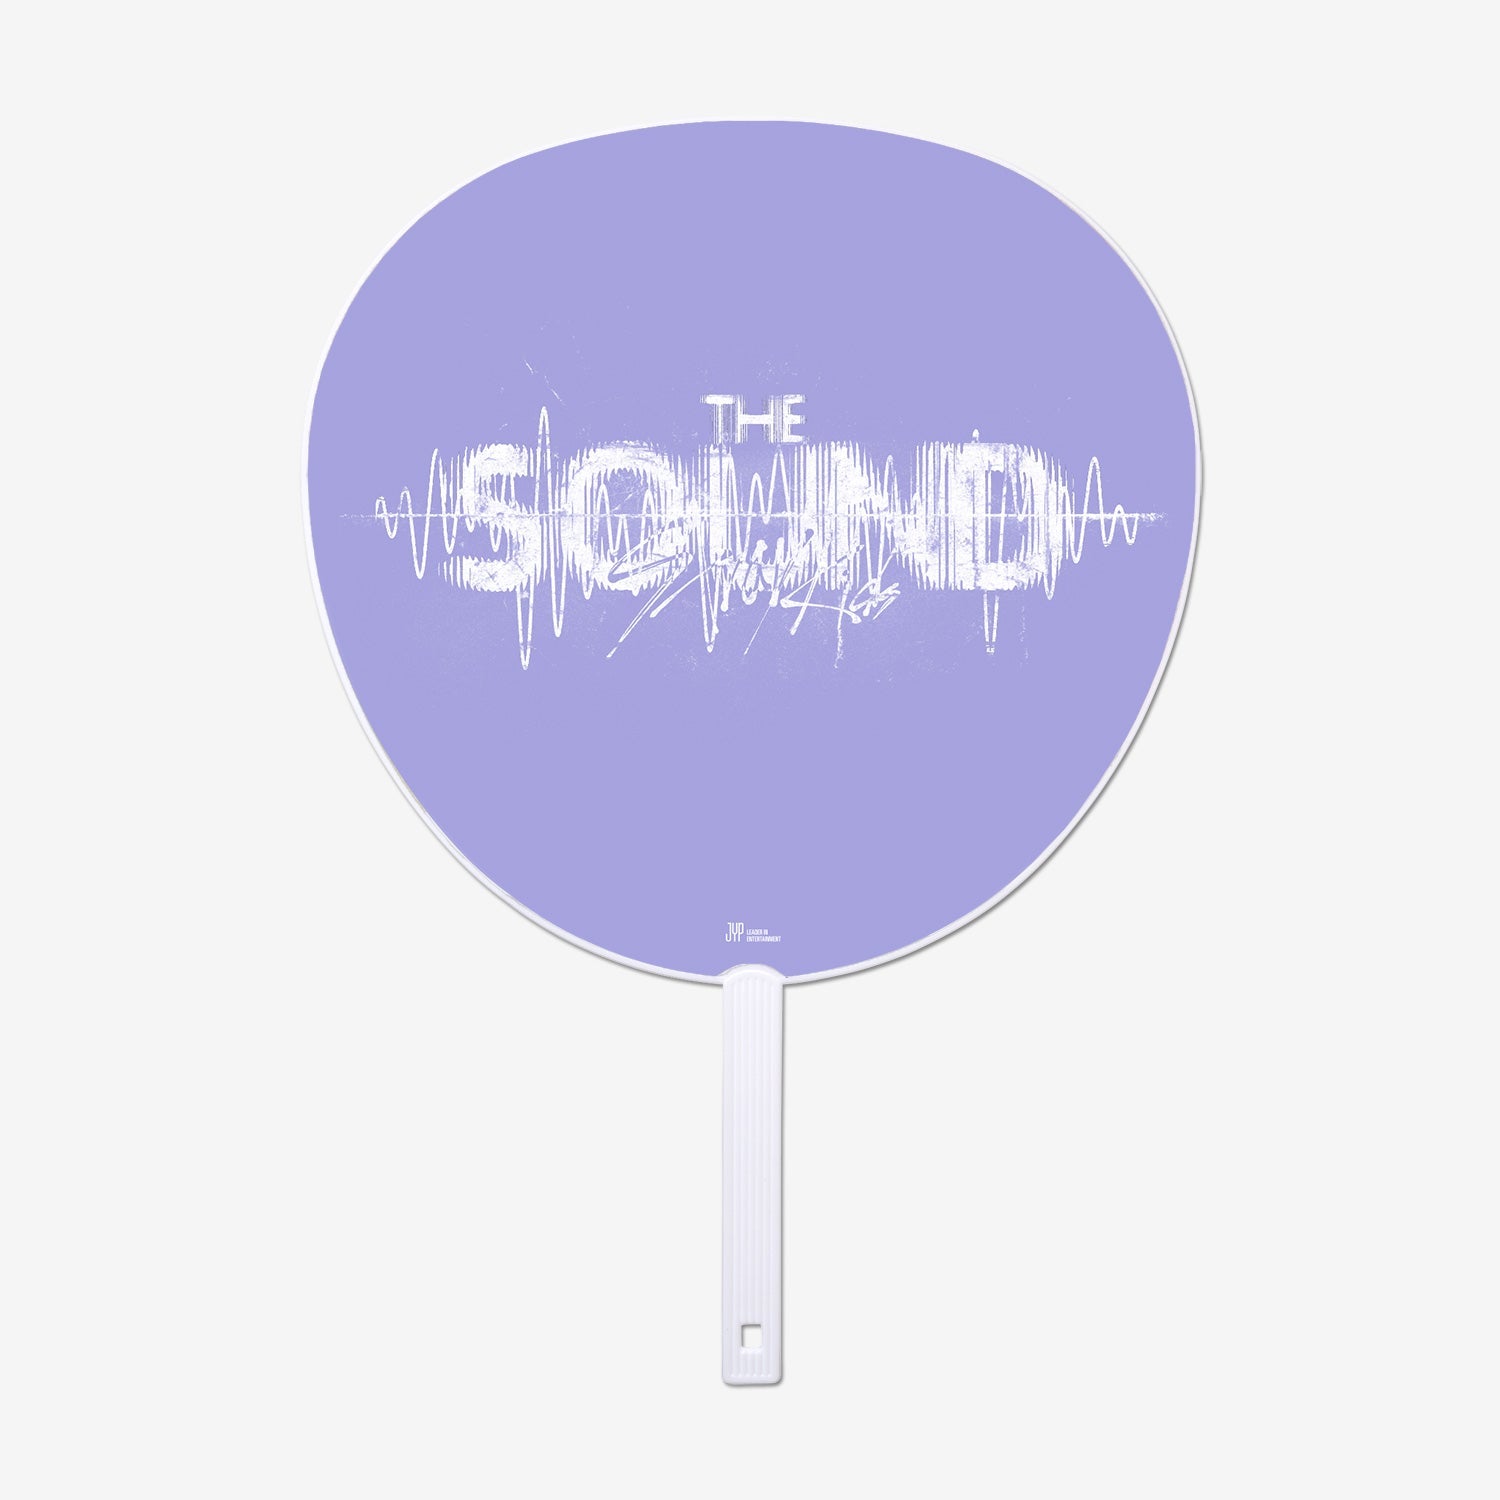 IMAGE PICKET - Lee Know / Stray Kids『THE SOUND』